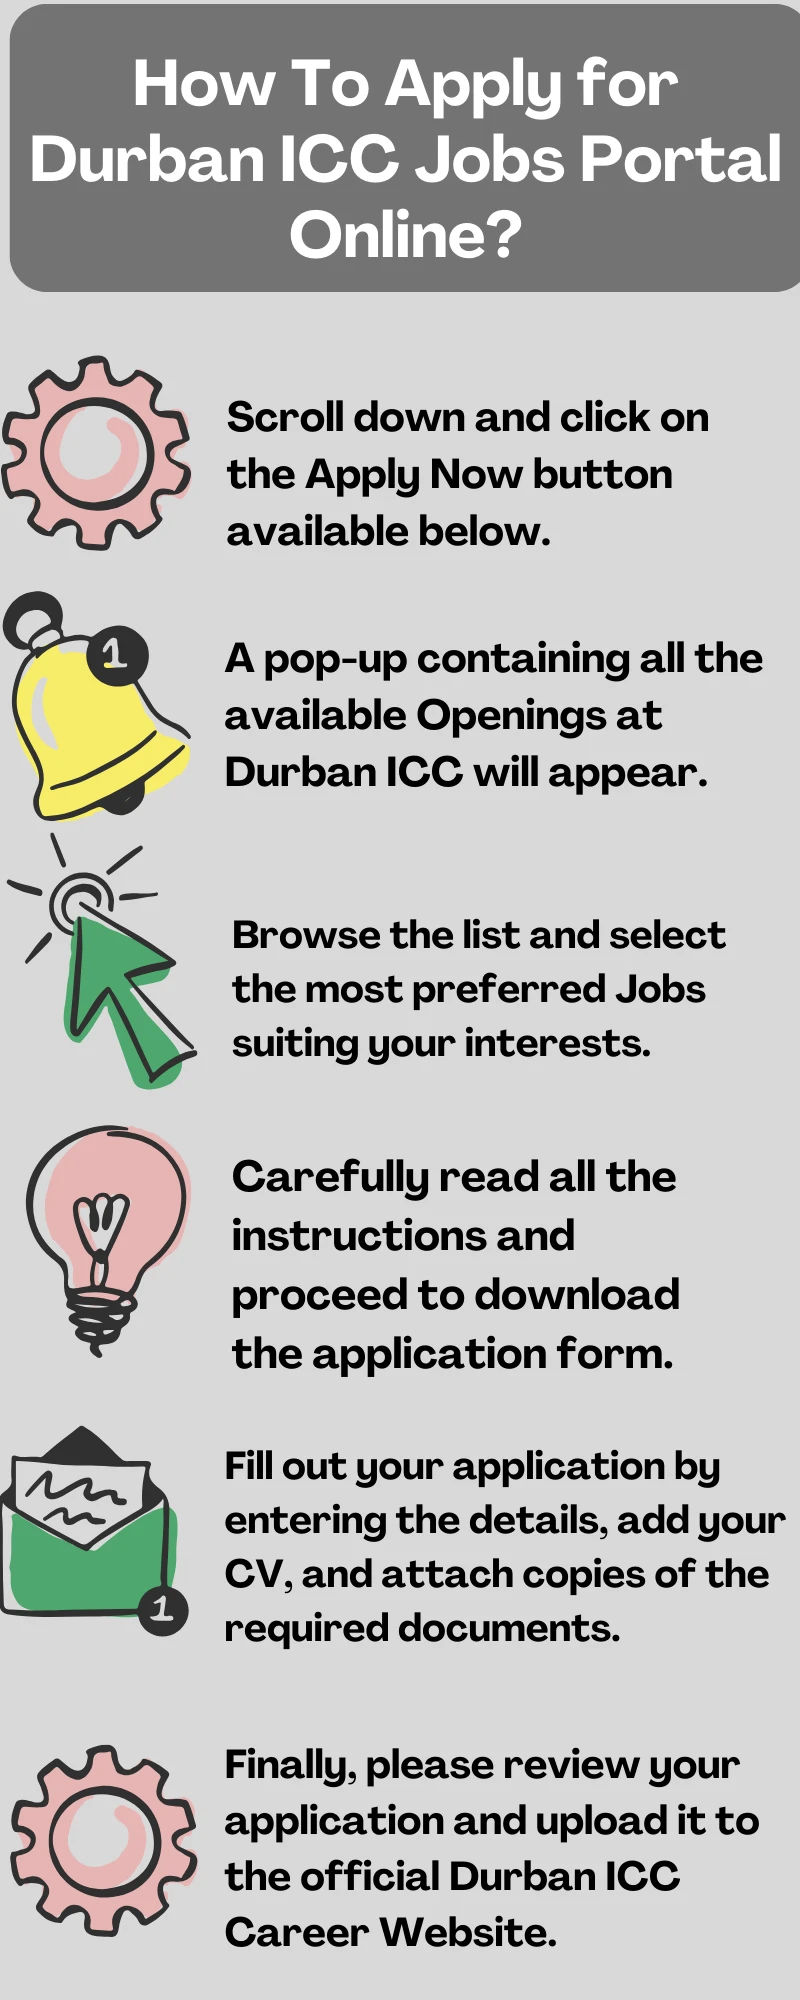 How To Apply for Durban ICC Jobs Portal Online?